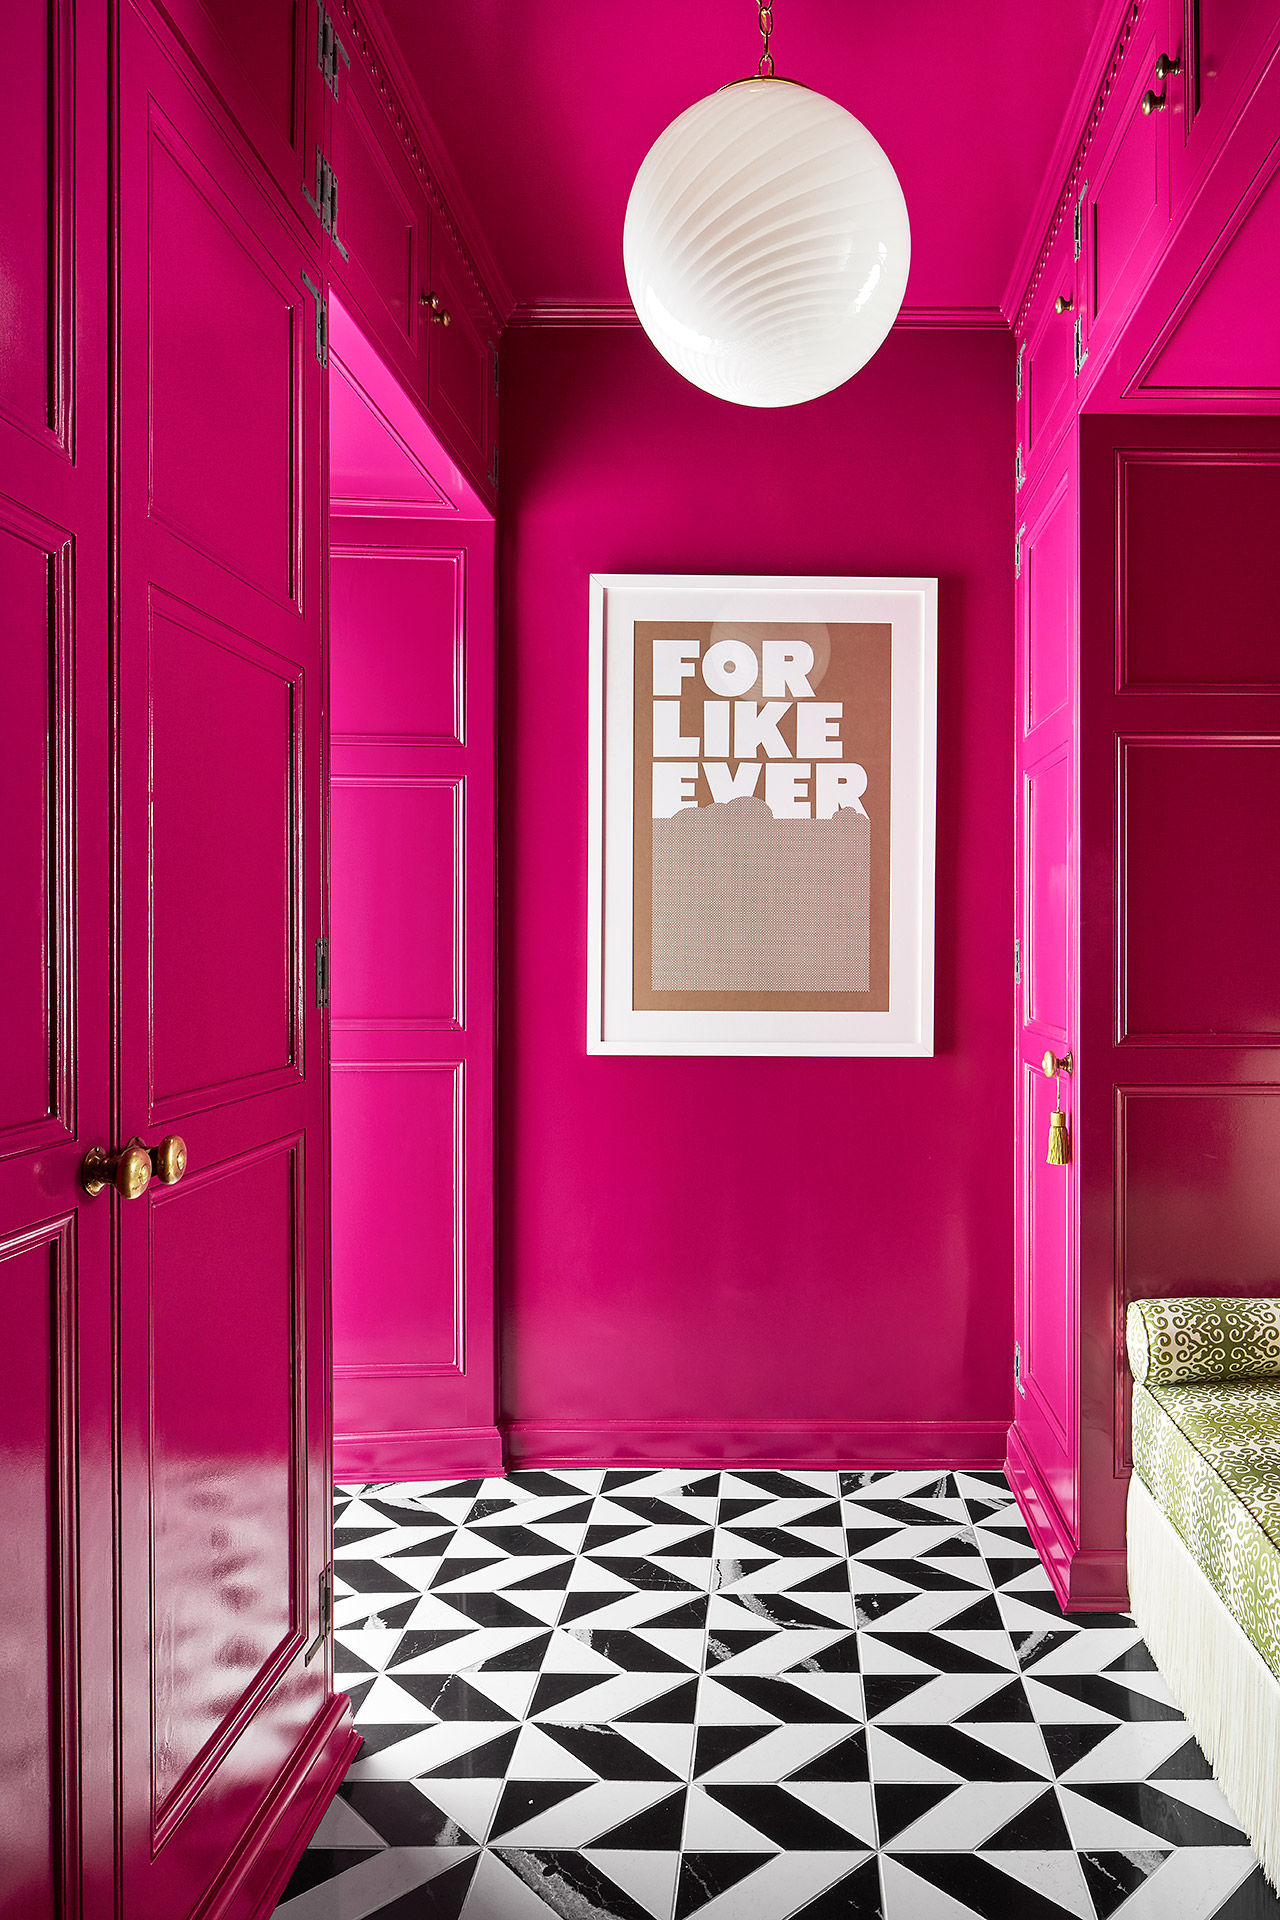 An entryway with hot pink walls, black and white quartz tiled flooring, and a gorgeous light fixture.